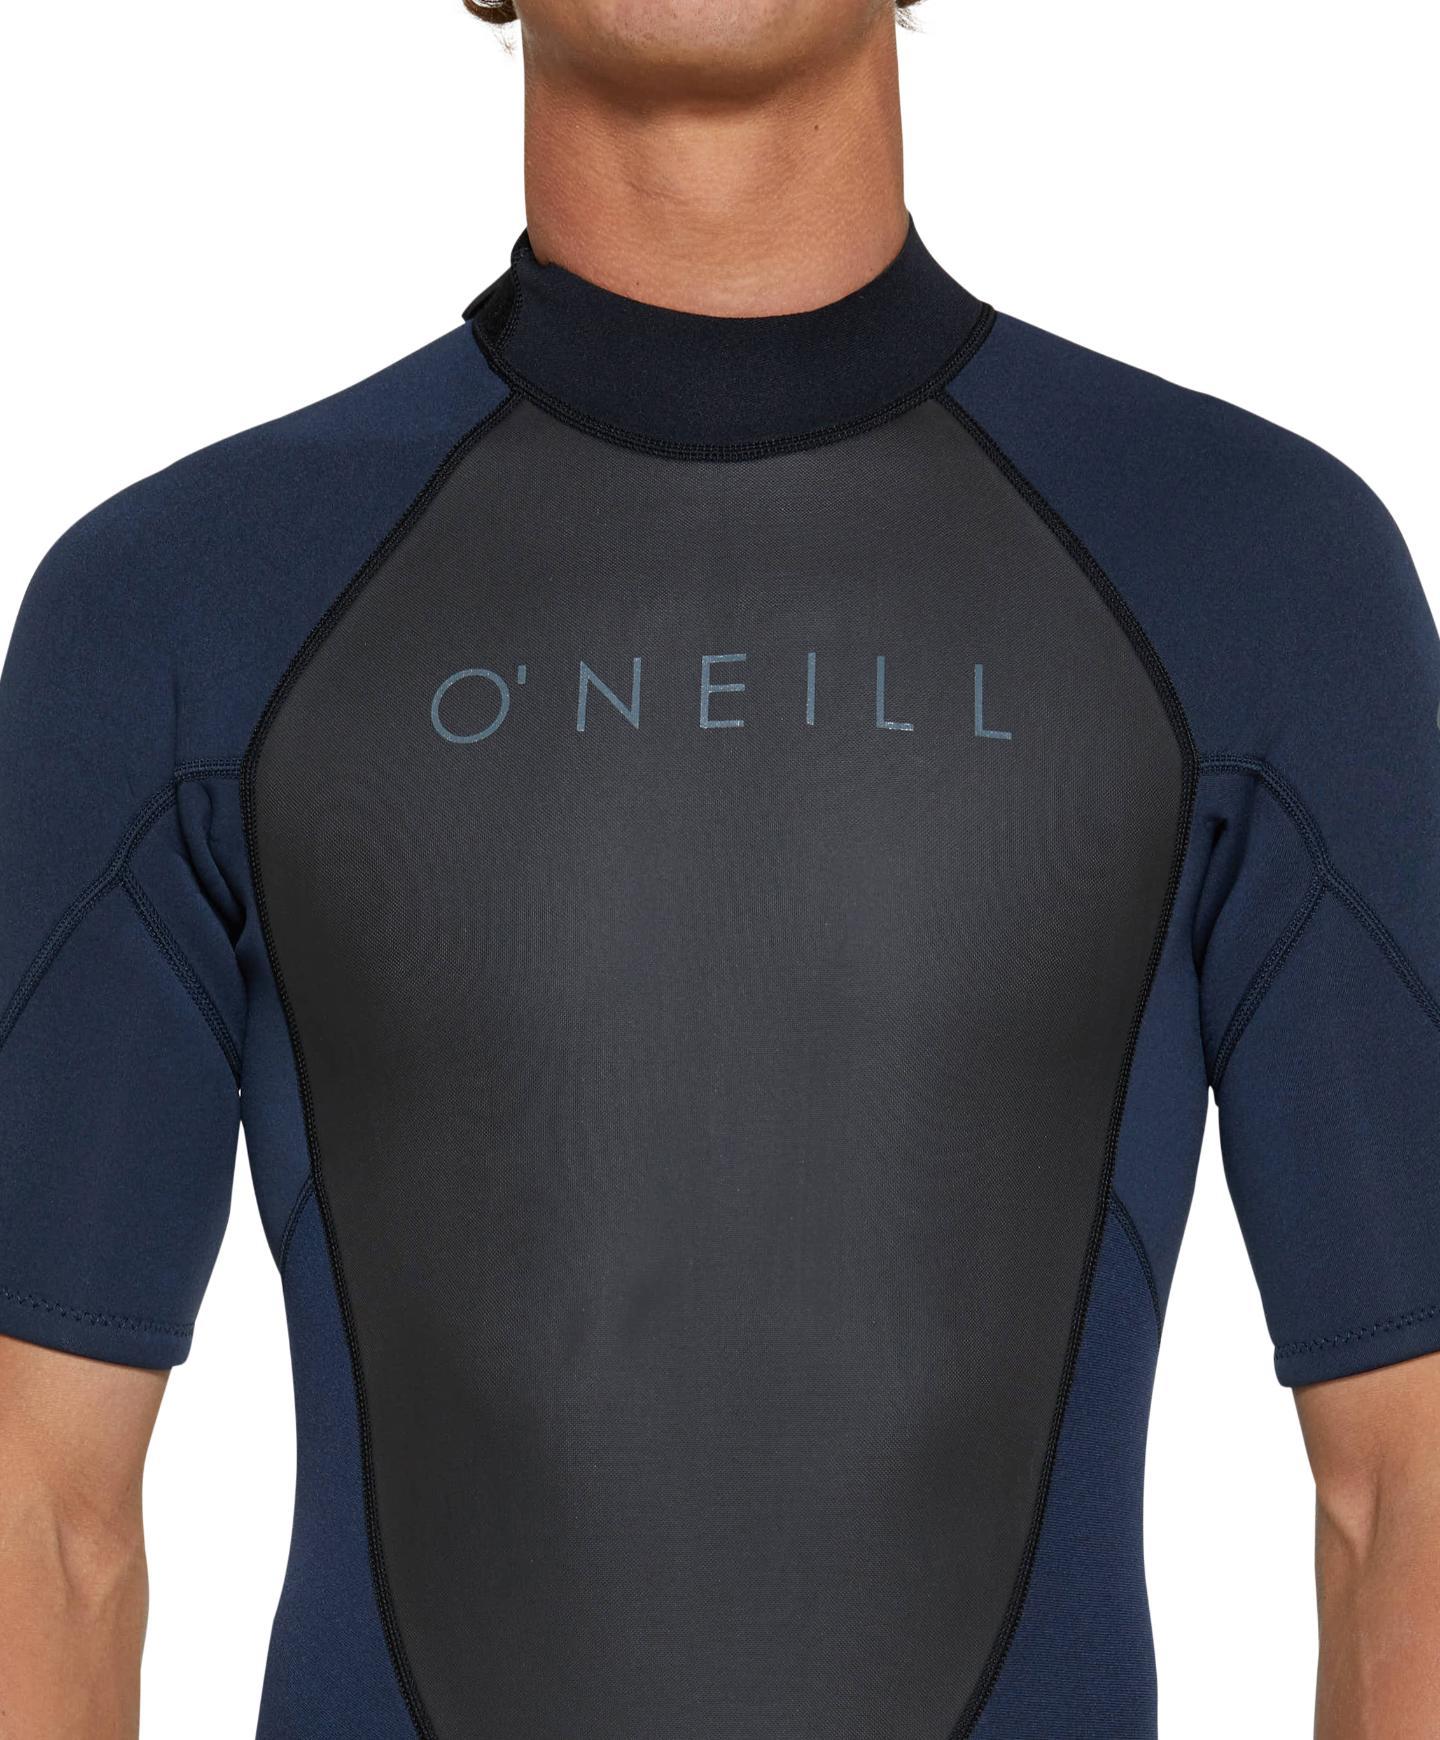 O'NEILL - Reactor 2mm SS Spring Wetsuit - Abyss/Abyss